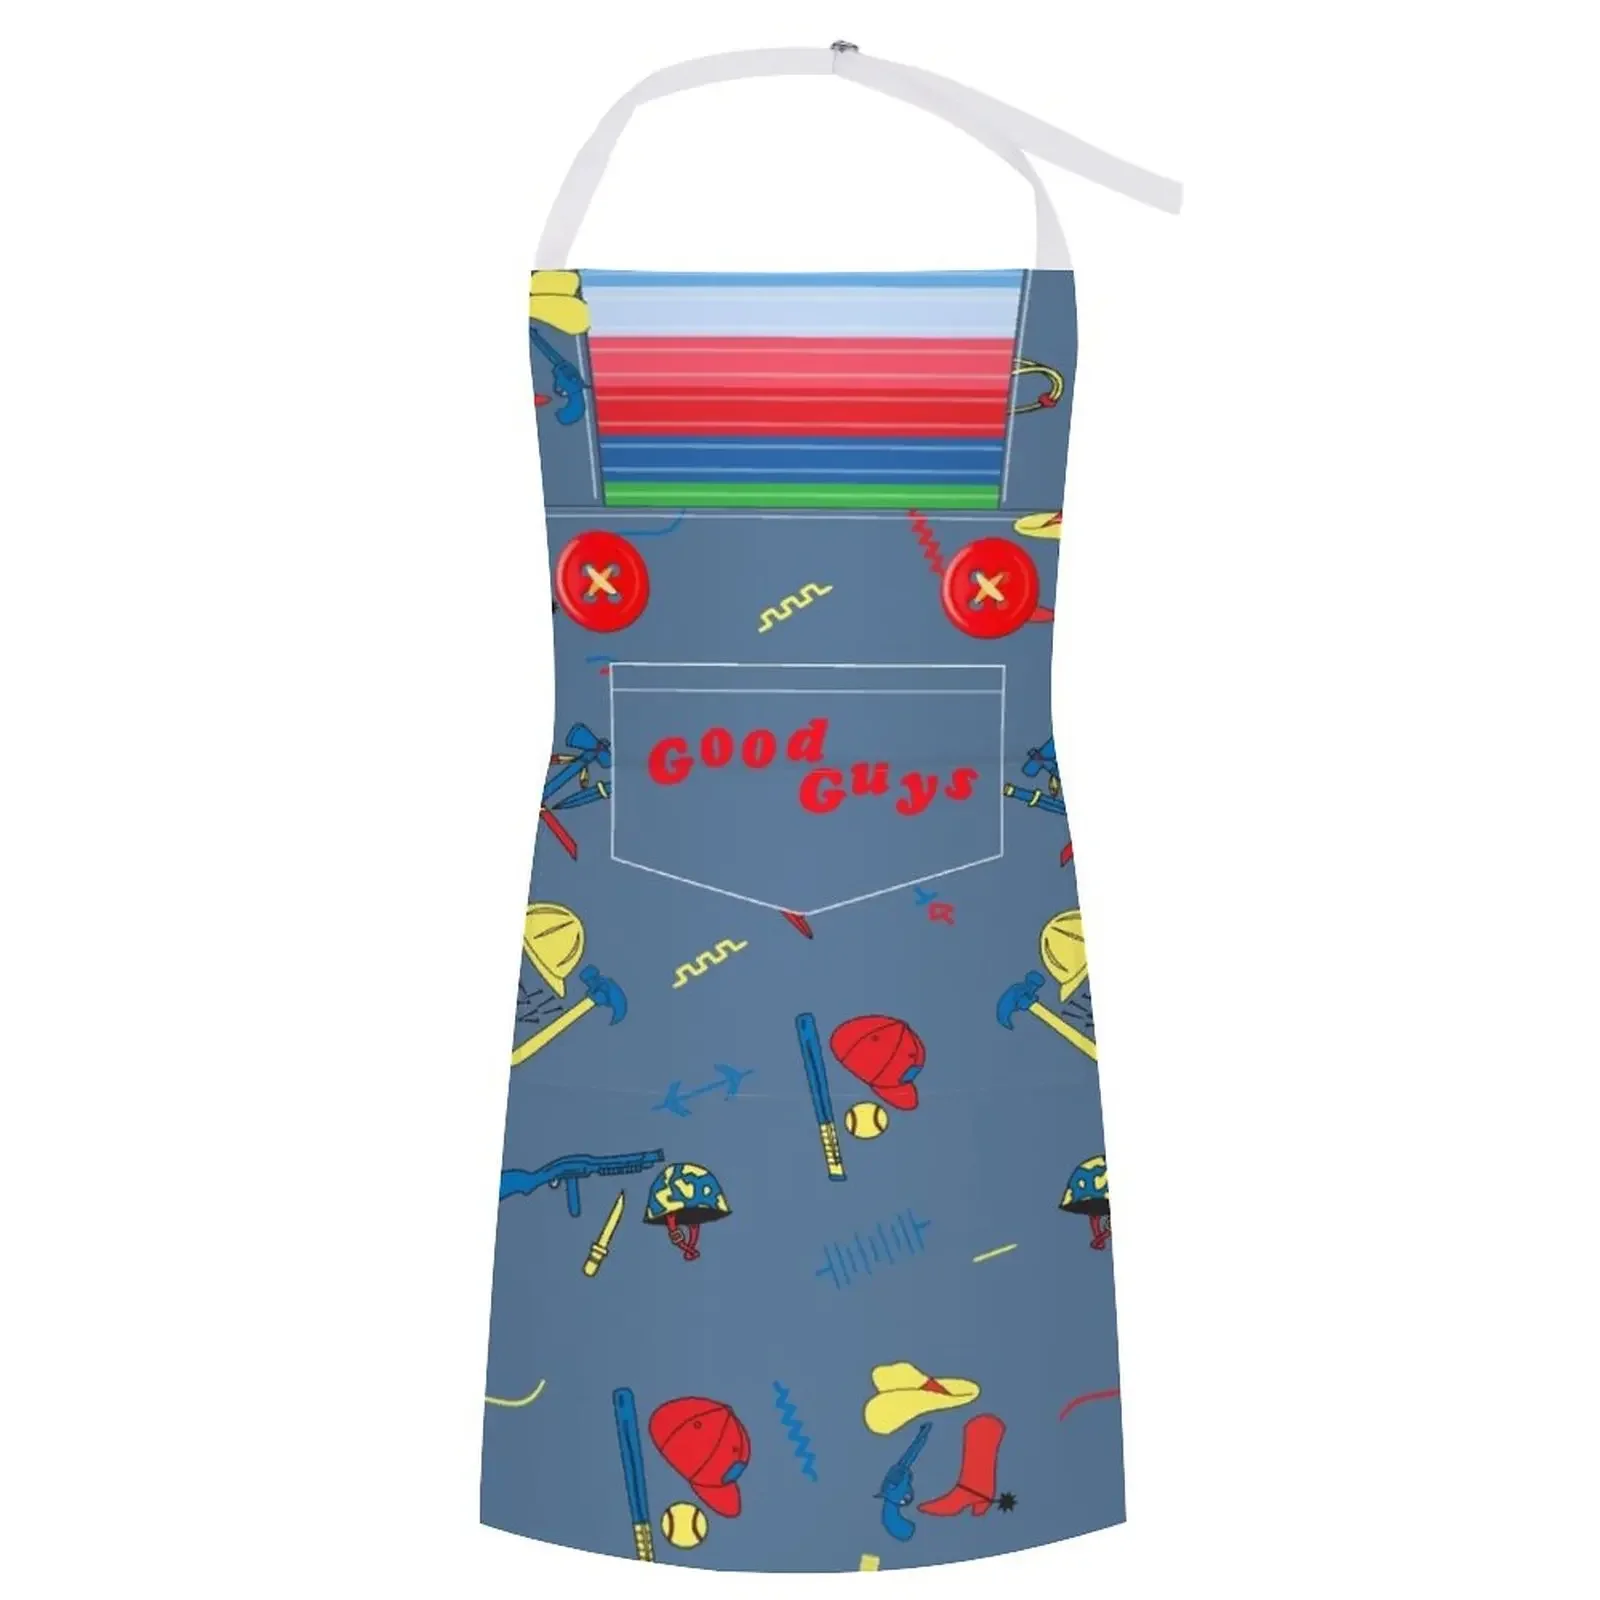 

Good Guys Child's Play Chucky - Killer Doll Overalls Apron Kitchen Aprons For Men Apron Ladies